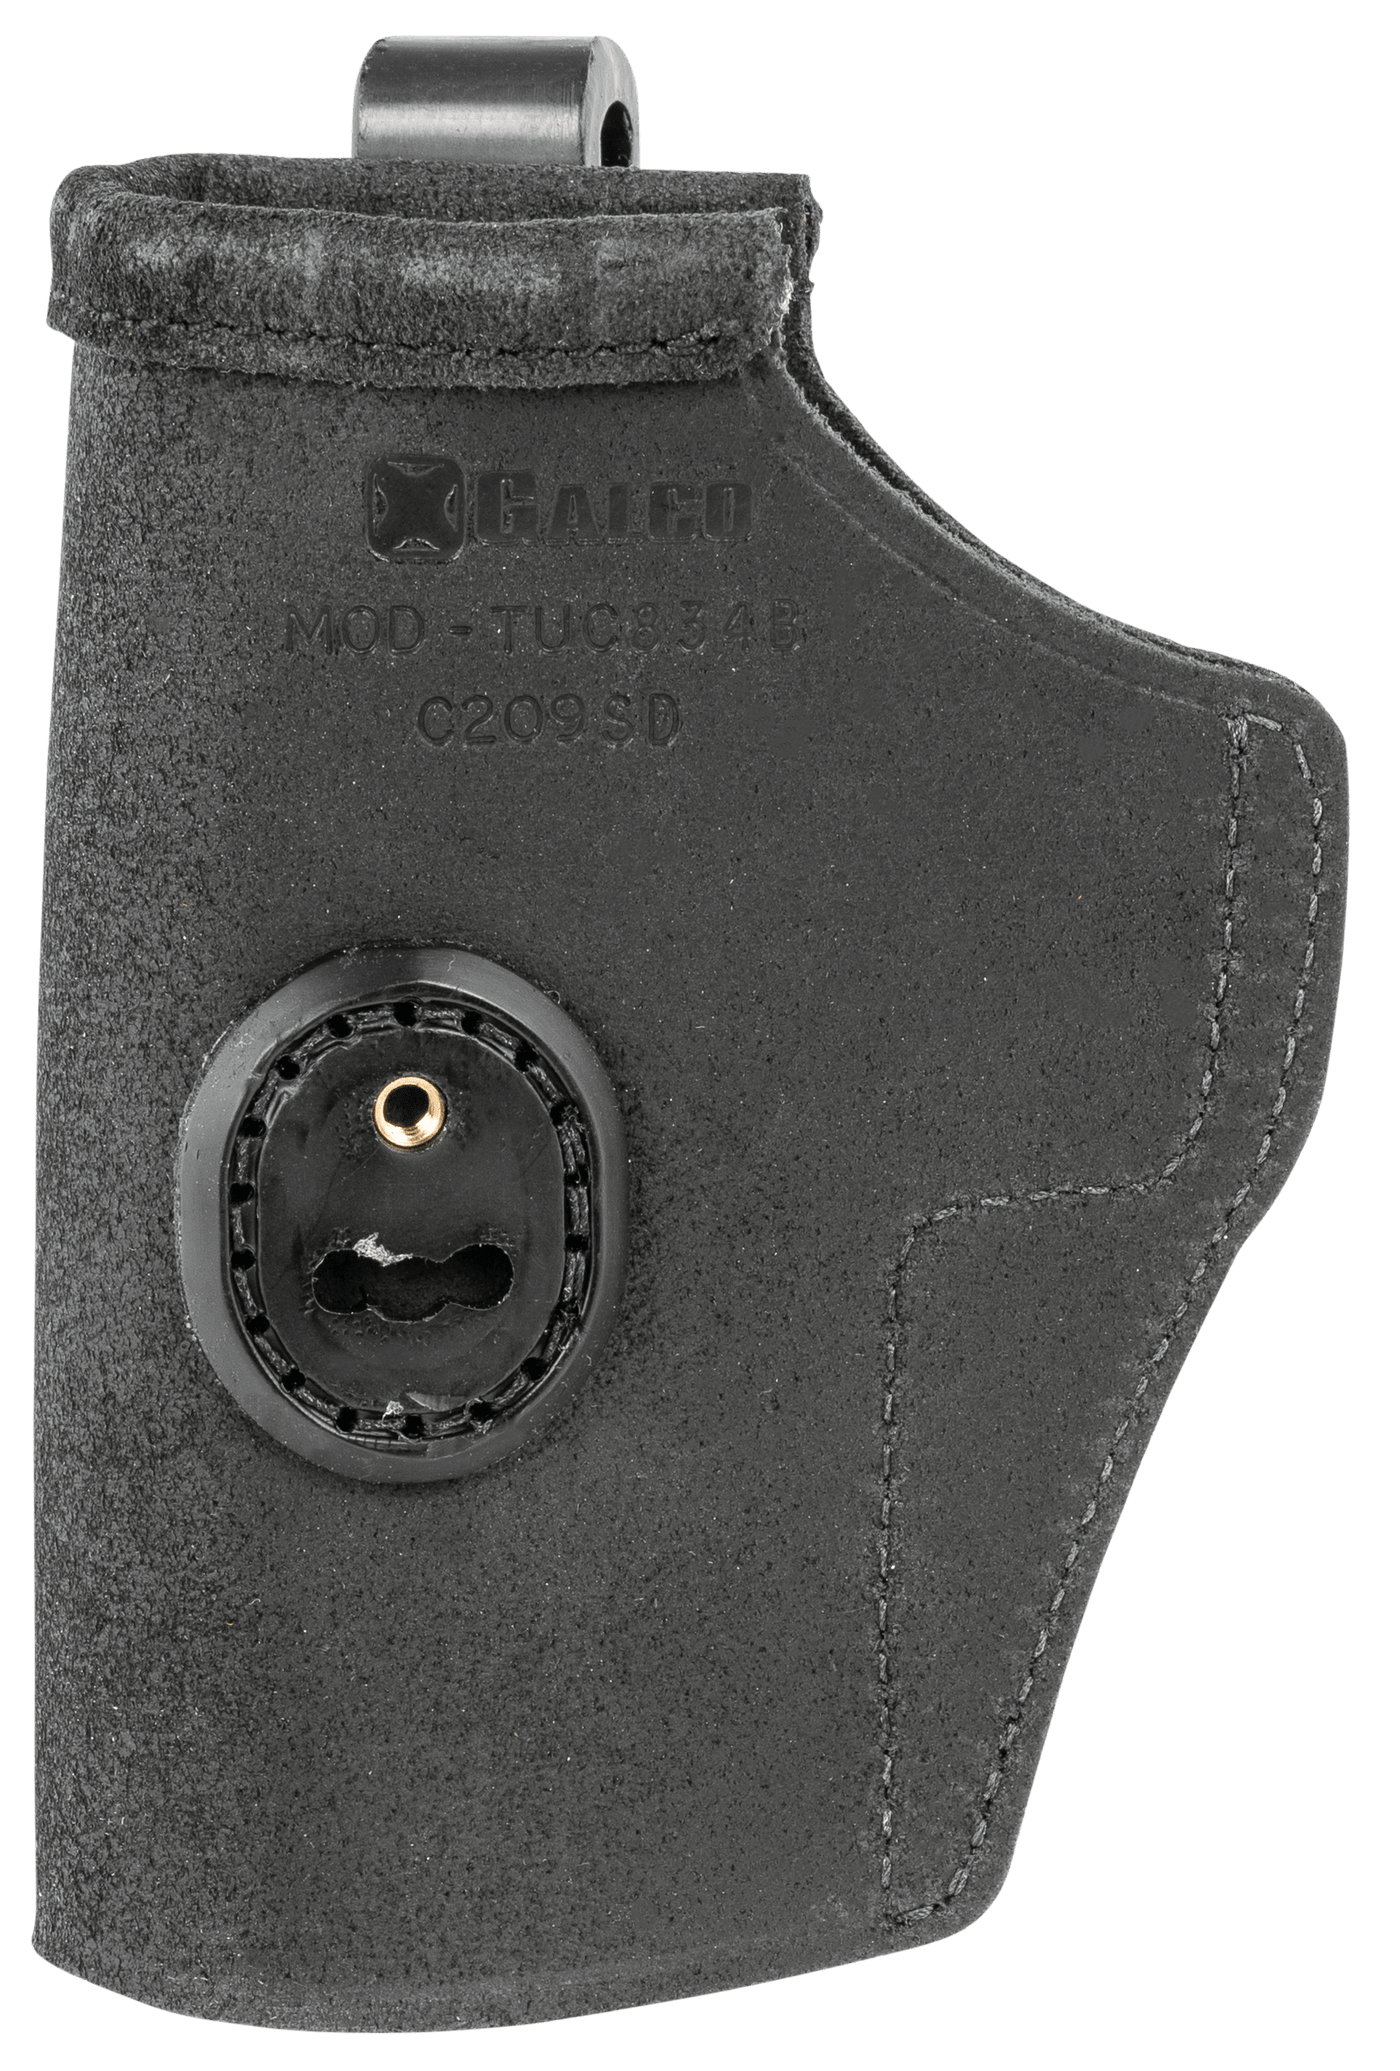 Galco Galco Tuck-n-go Itp Holster - Ambi Lther M&p Shld 9ez Black Holsters And Related Items